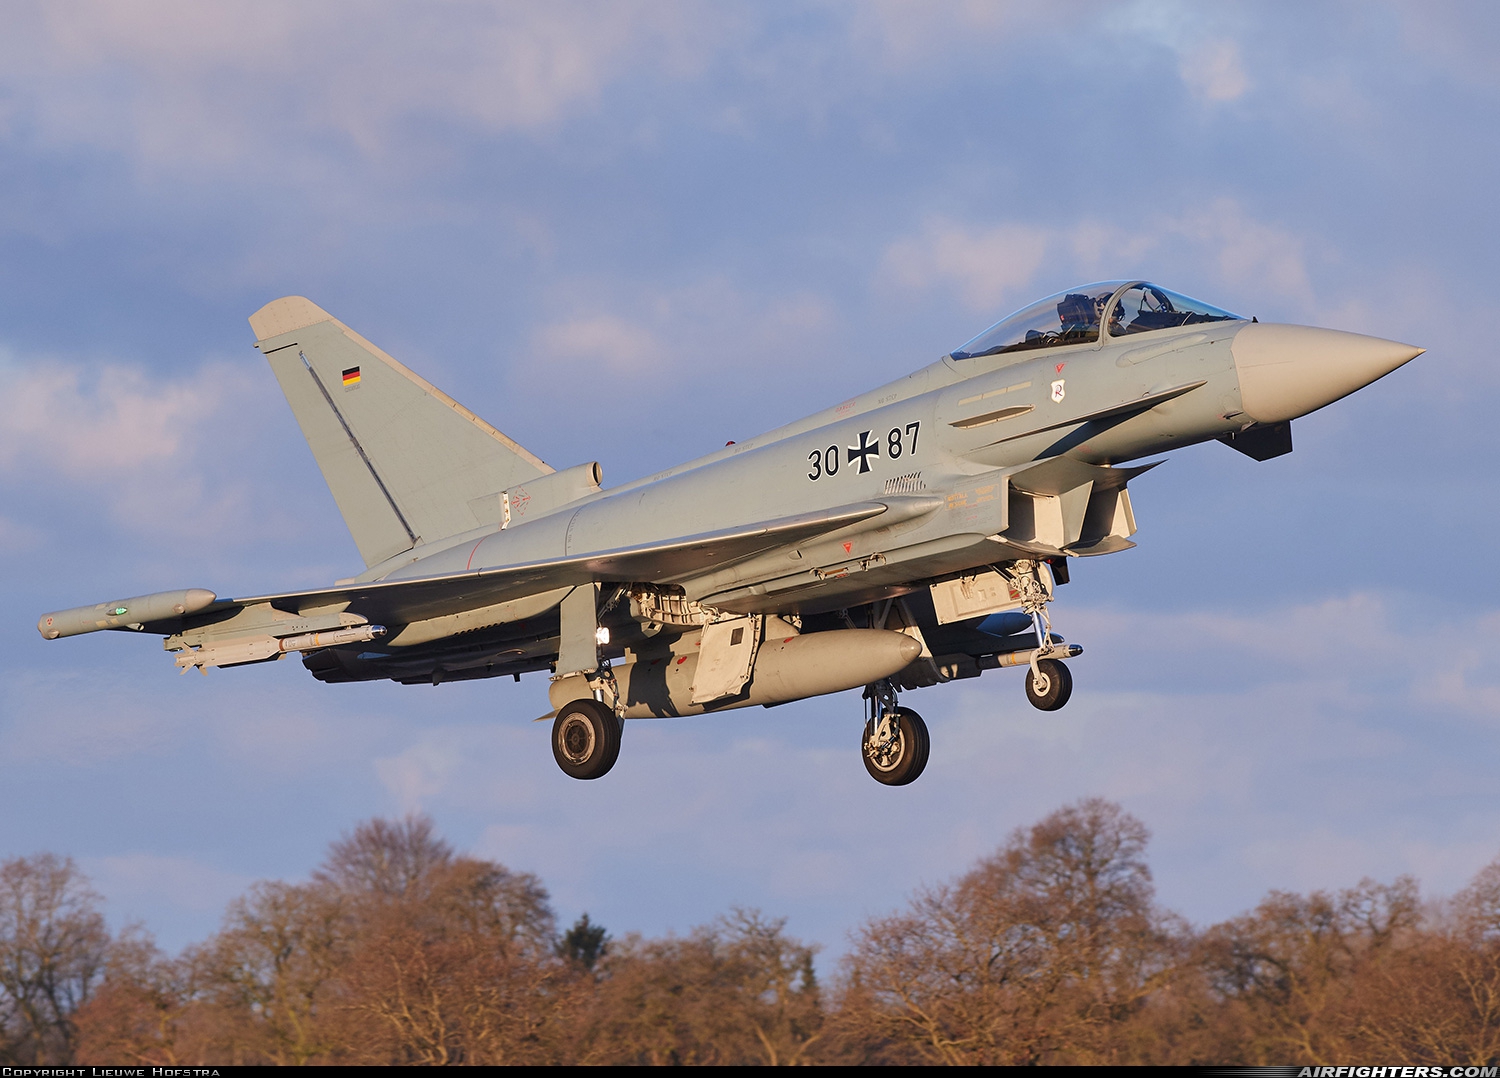 Germany - Air Force Eurofighter EF-2000 Typhoon S 30+87 at Wittmundhafen (Wittmund) (ETNT), Germany